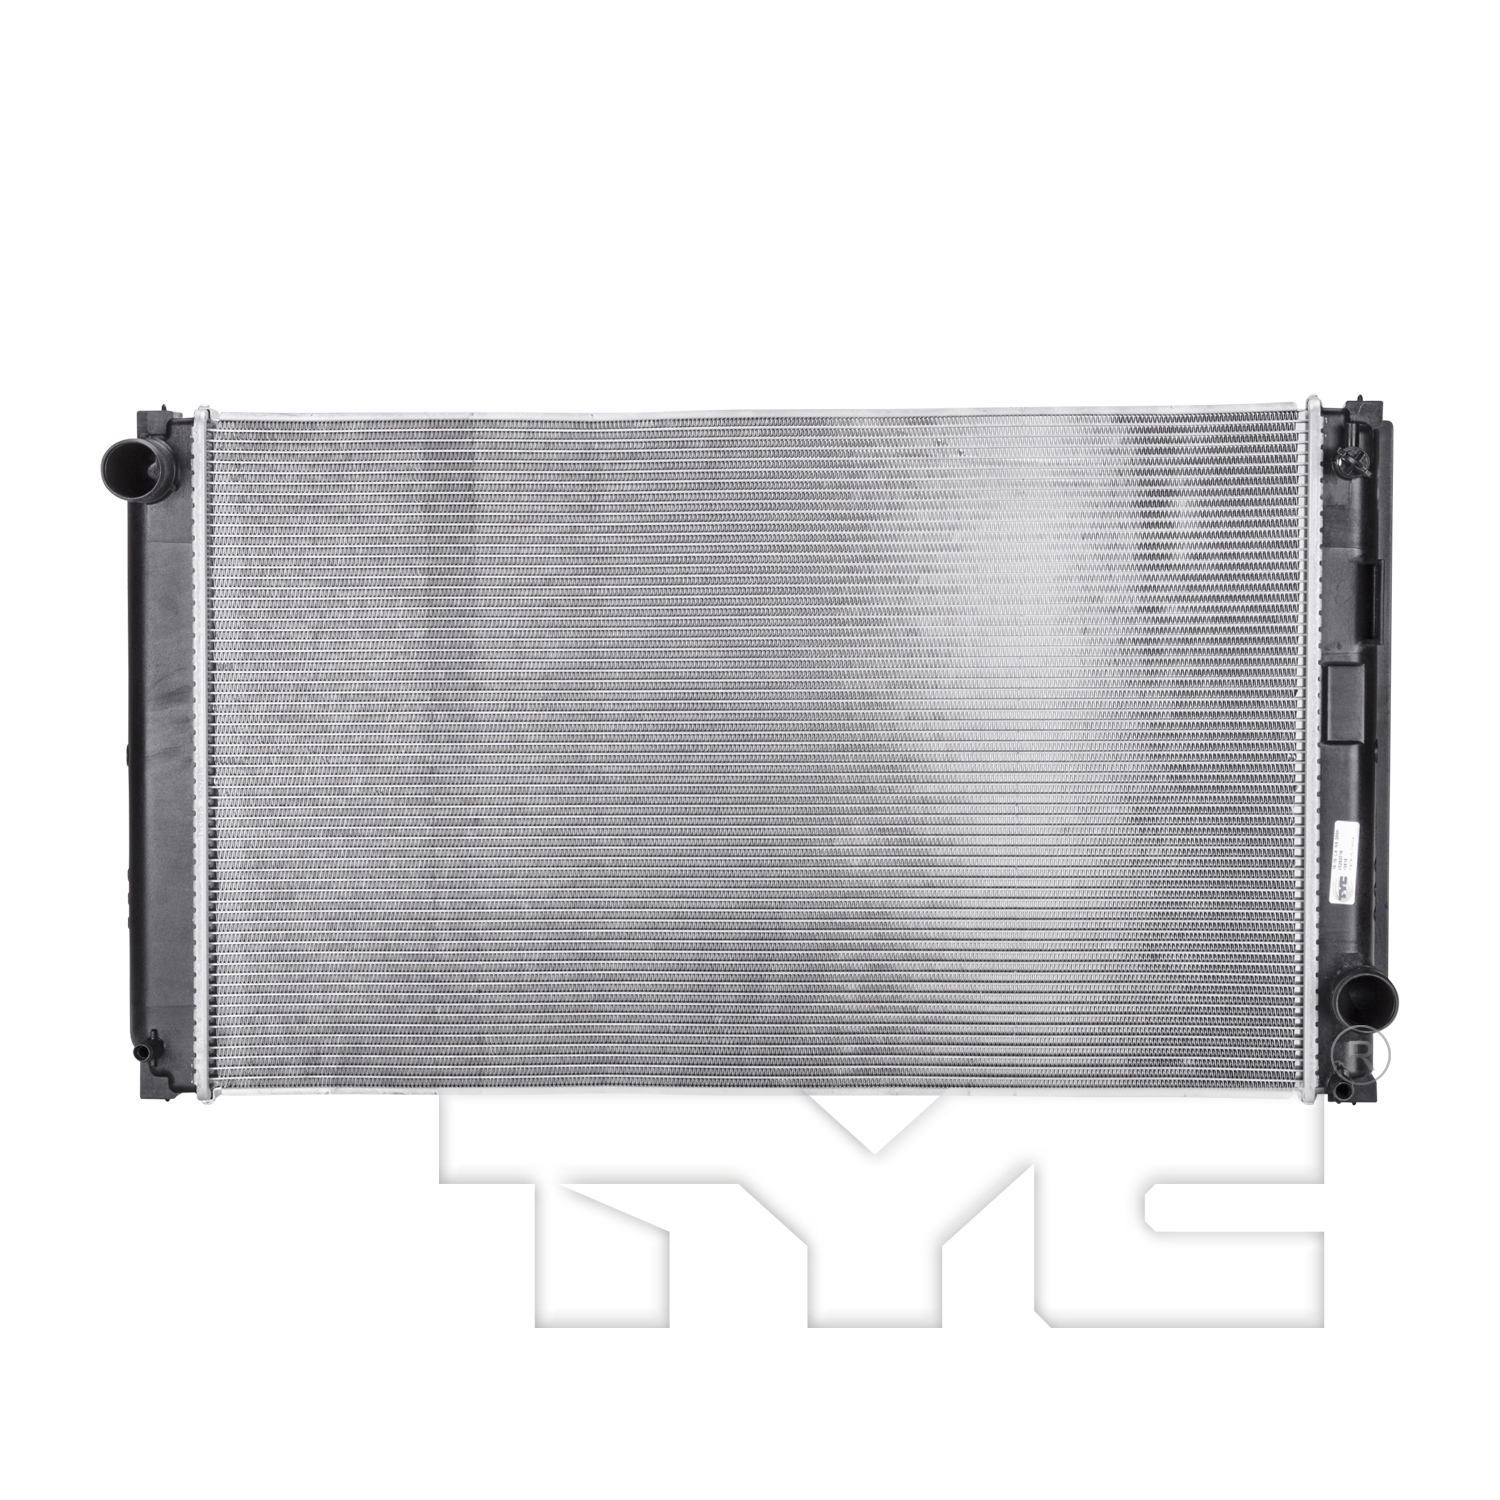 Aftermarket RADIATORS for LEXUS - NX300H, NX300h,15-19,Radiator assembly